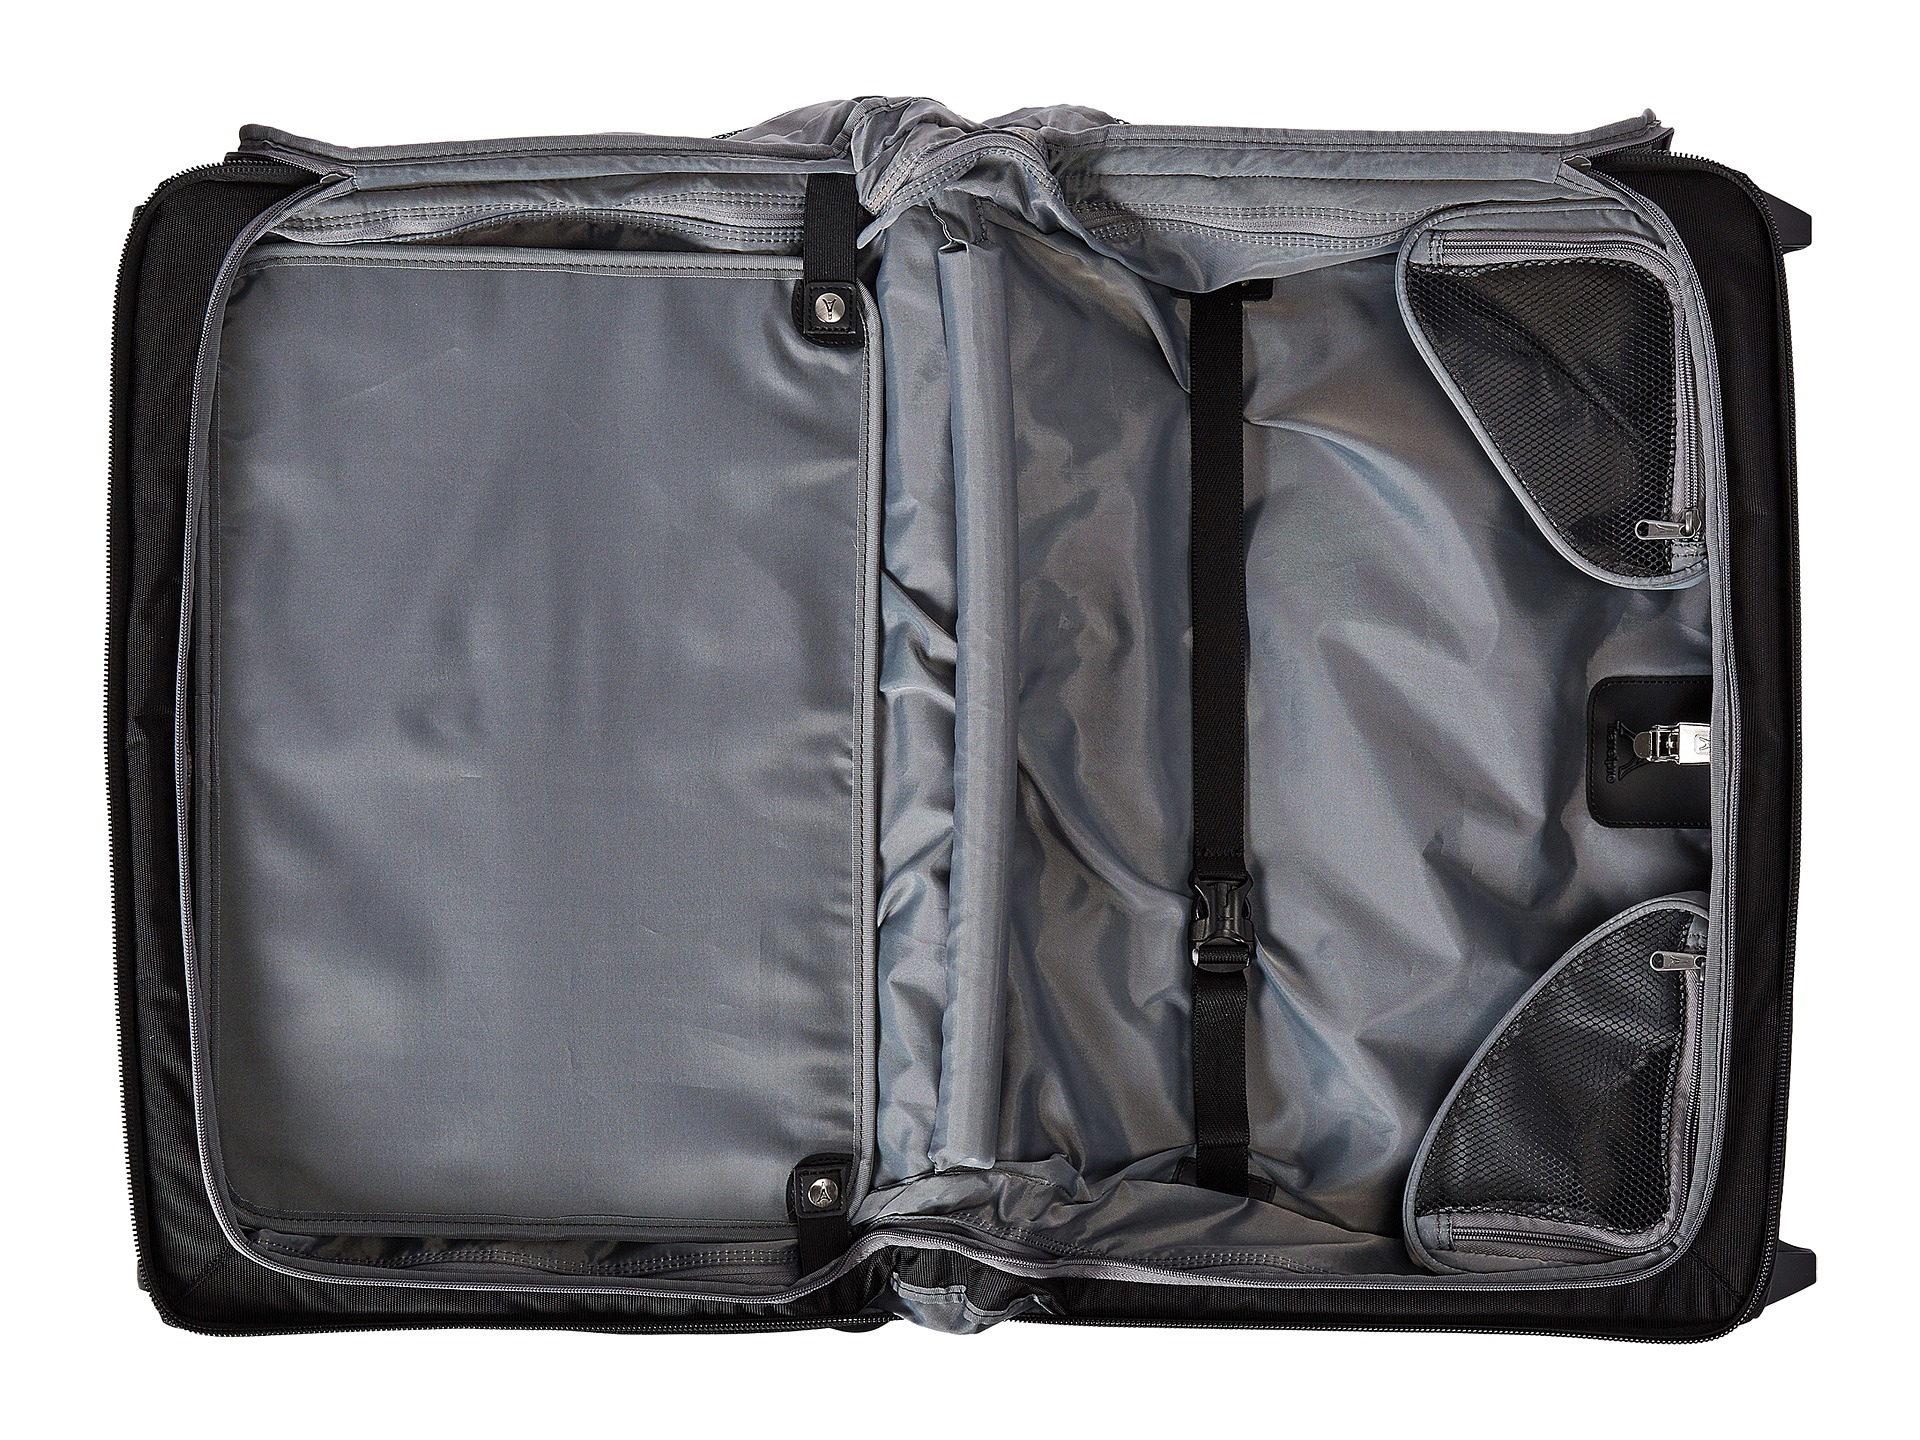 Travelpro Crew 11 - Carry-On Rolling Garment Bag at 0